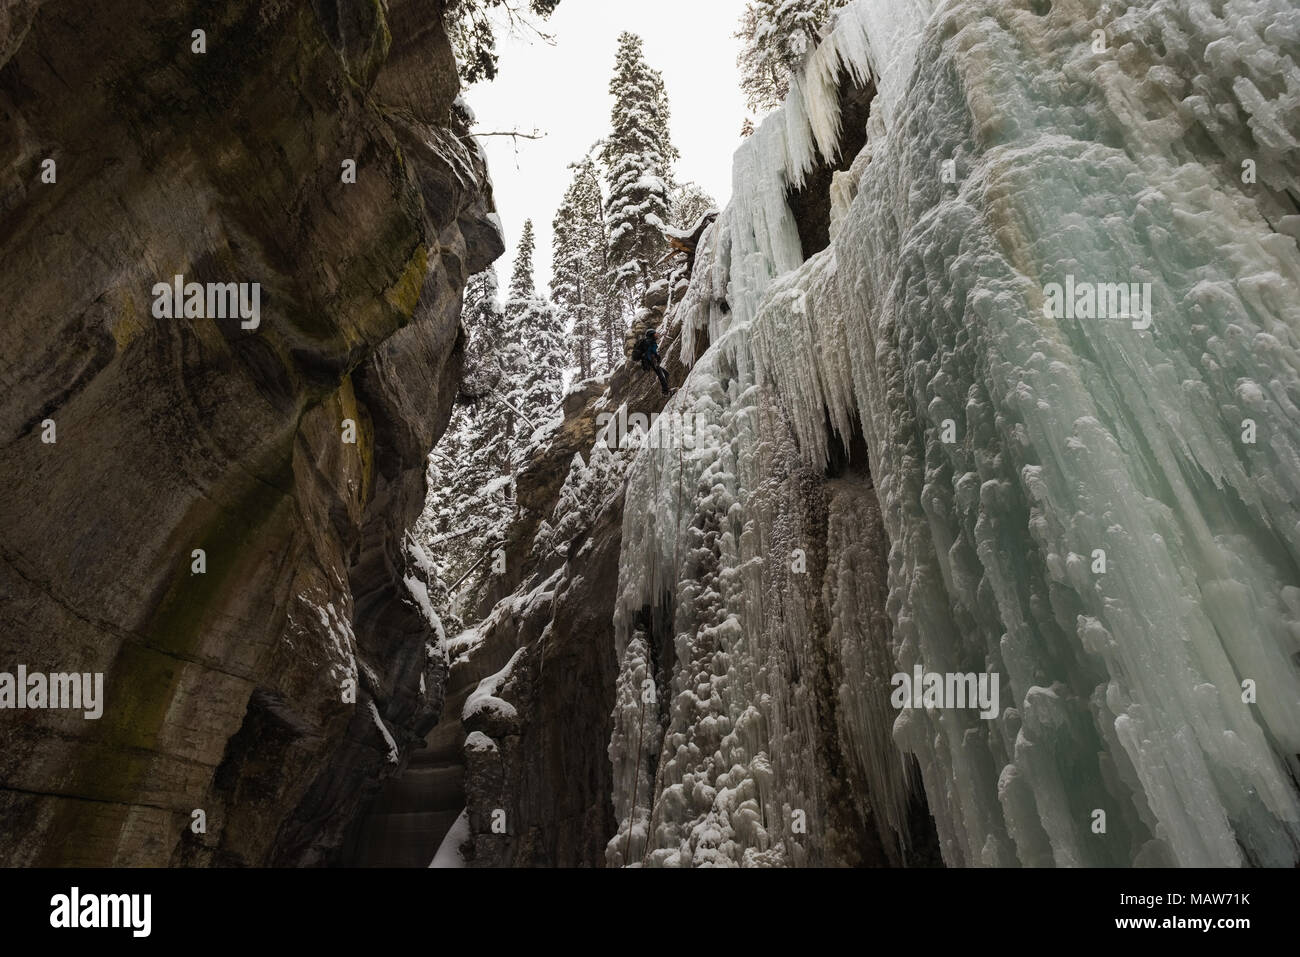 Rocky ice mountain during winter Stock Photo